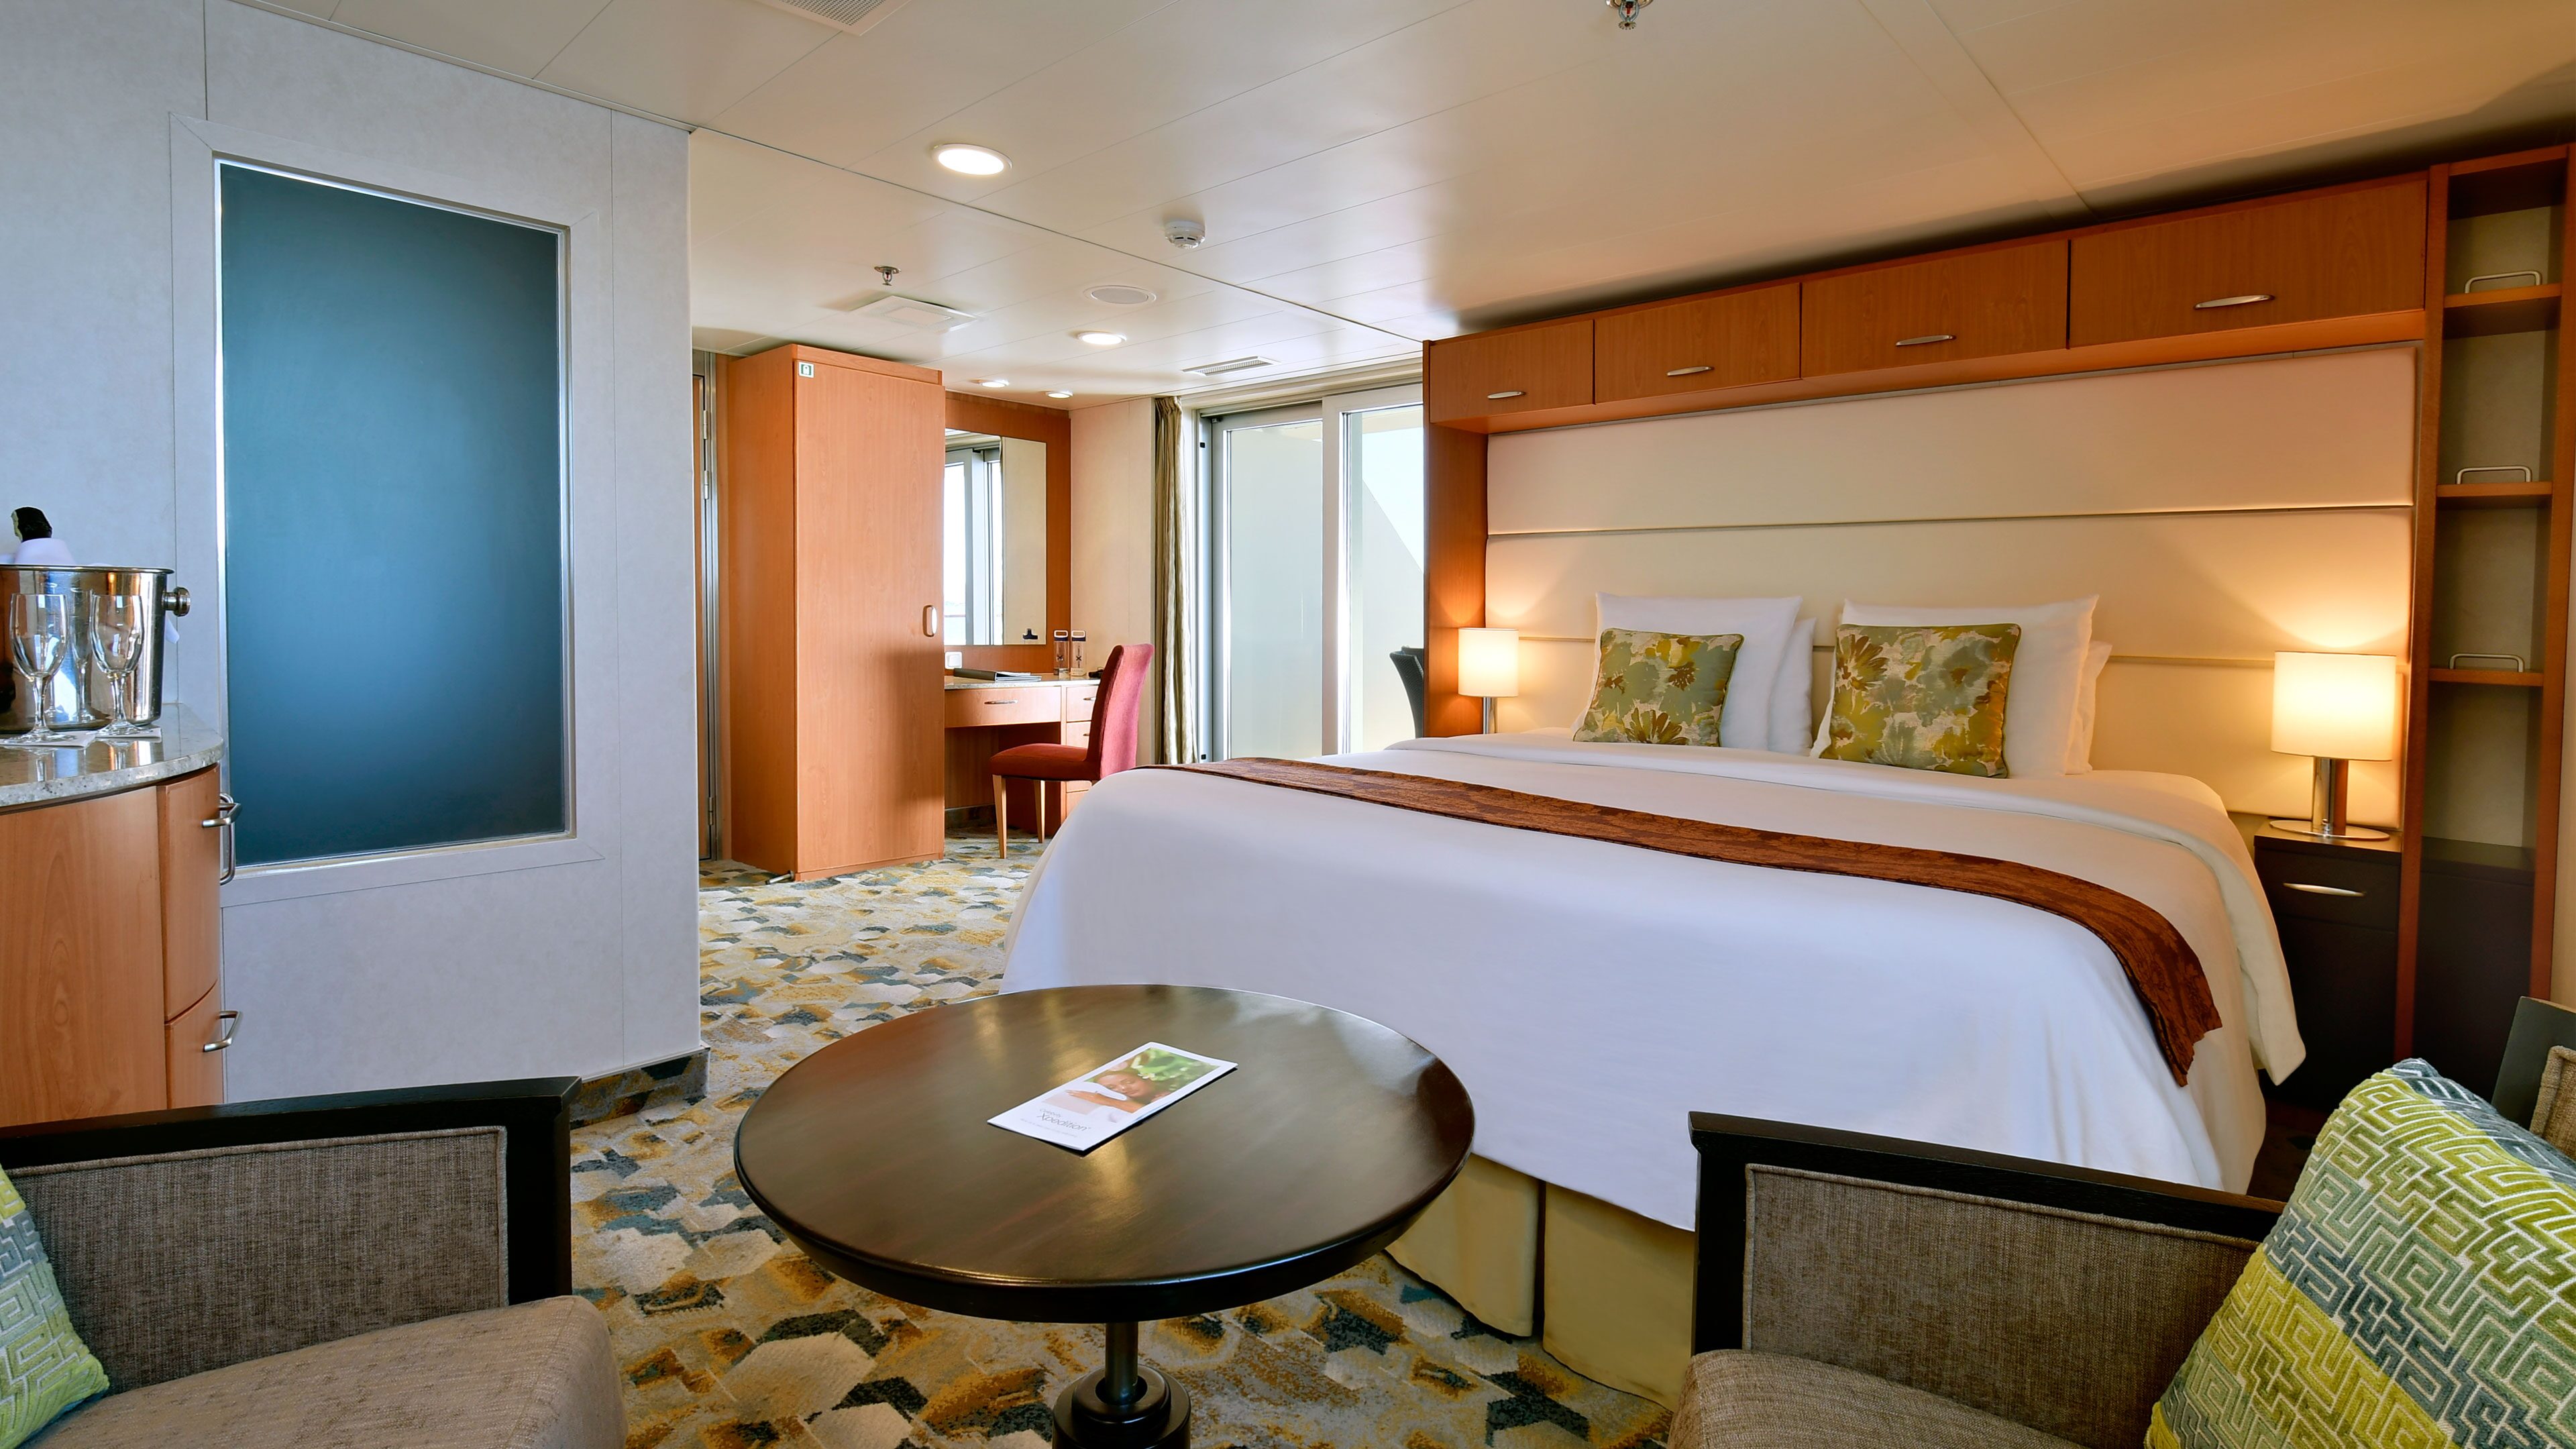 Celebrity Xpedition Royal Suite - Cruise Ship Suite on Celebrity Cruises